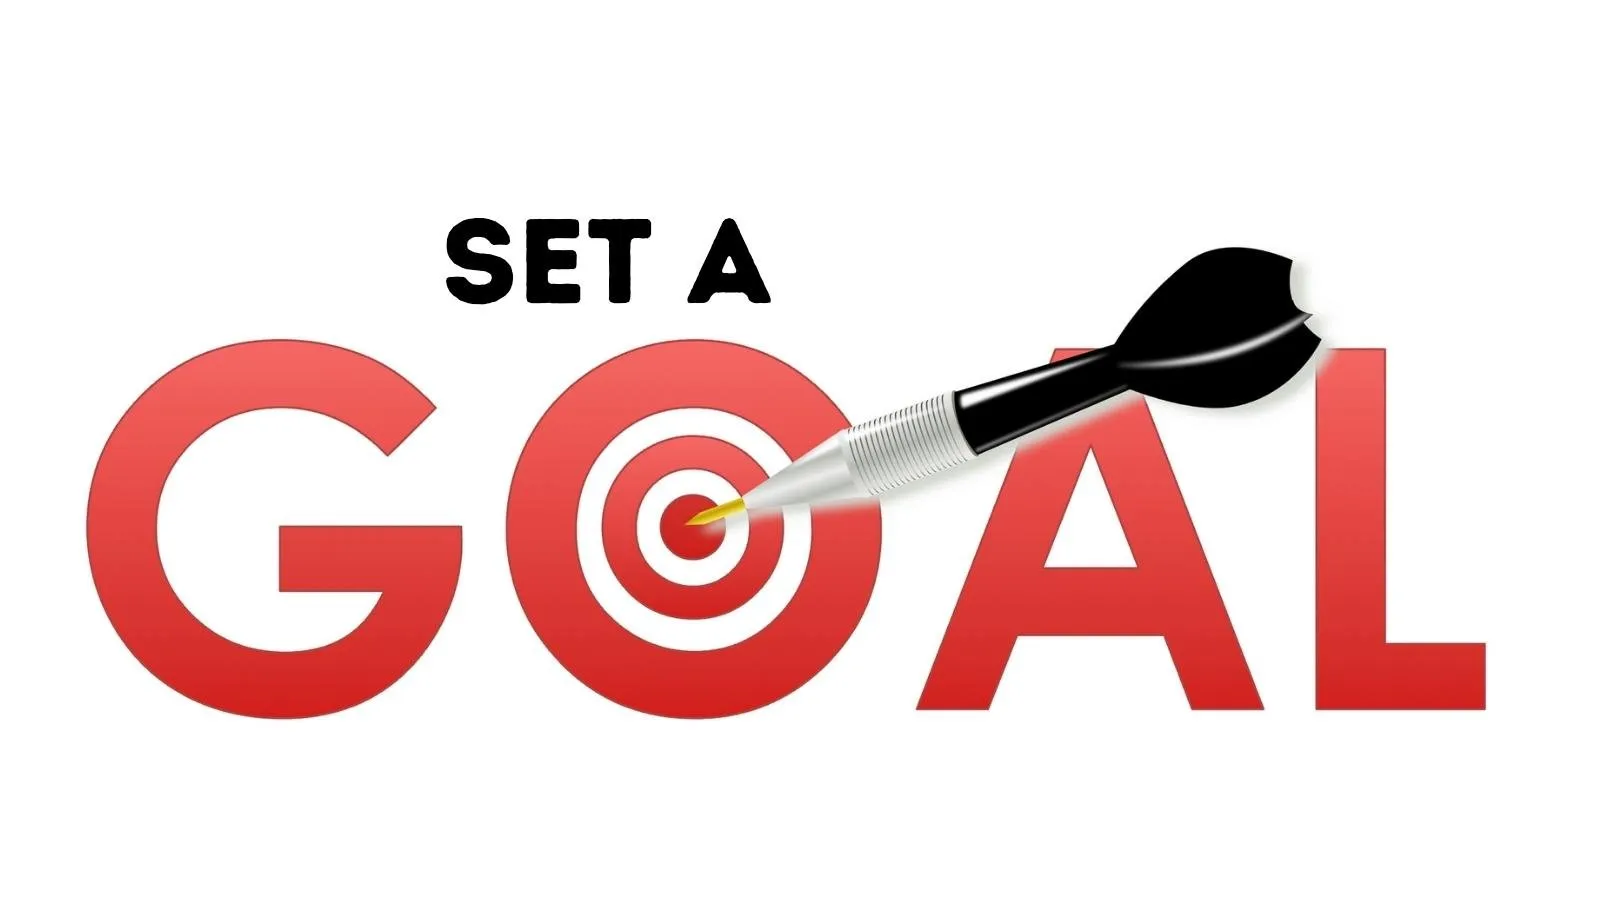 Your freelancer's goal setting process 